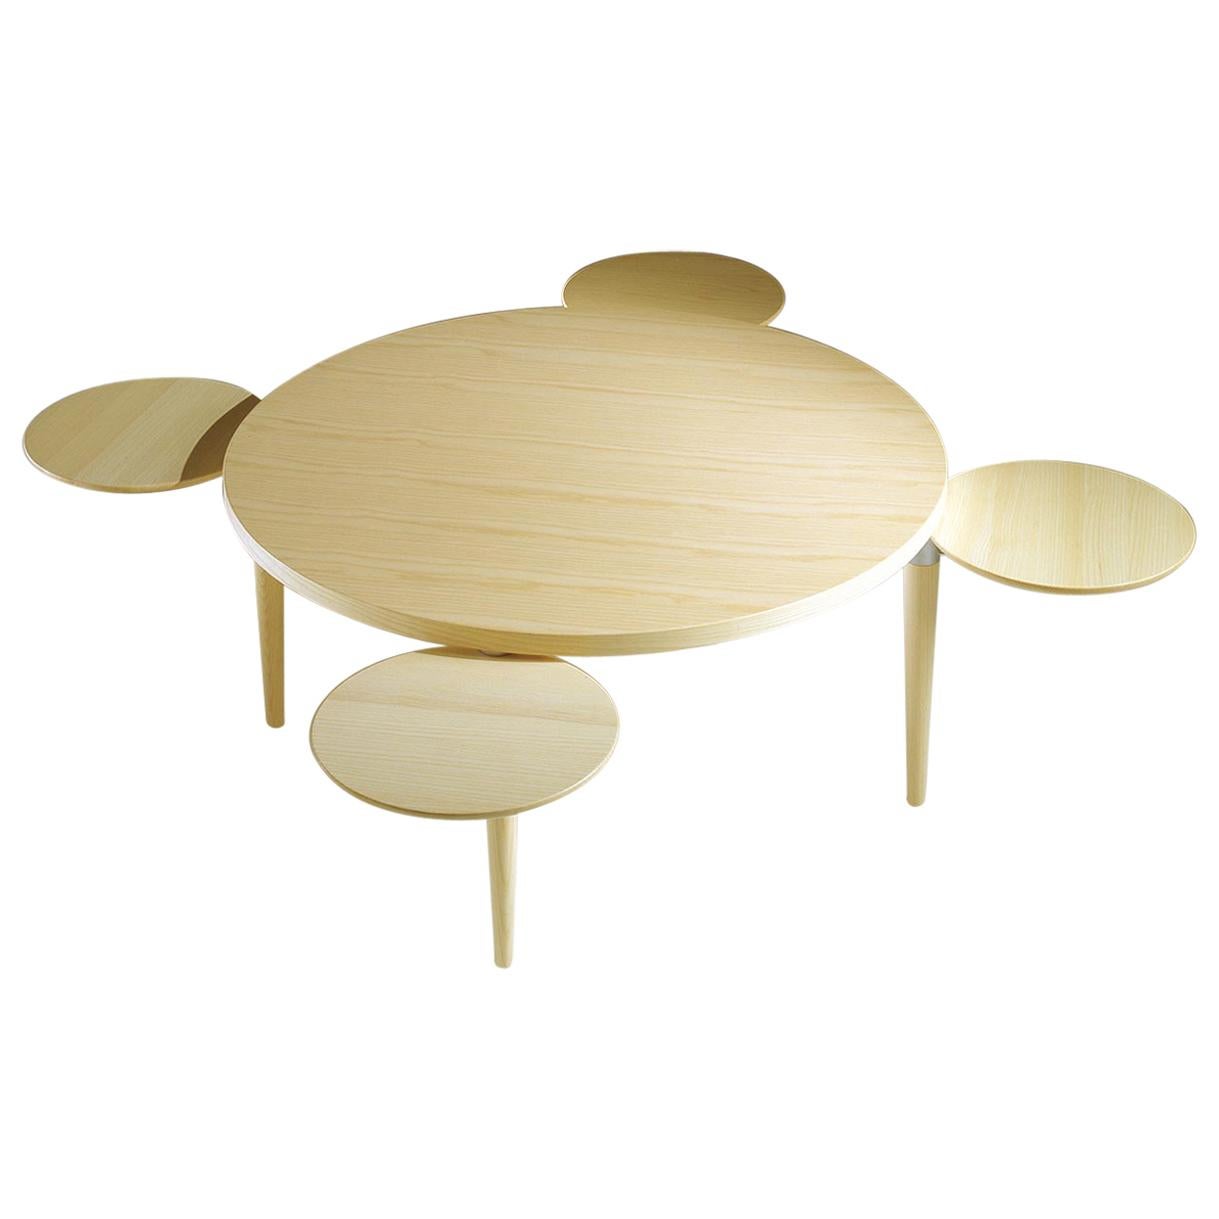 Nanna Ditzel Mondial Coffee Table with Leaf, Ash For Sale